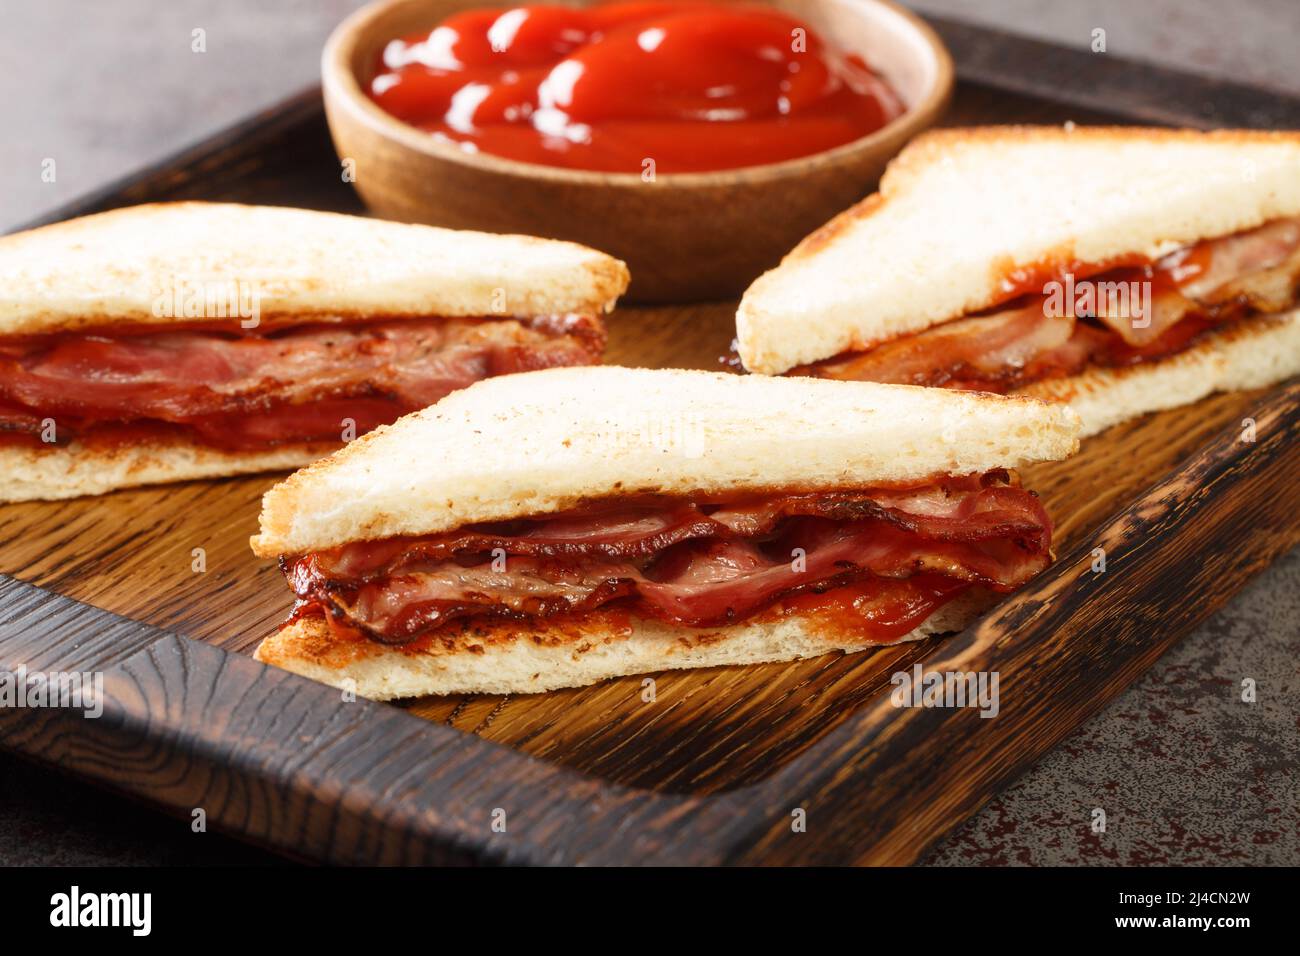 Bacon Butty sandwich with ketchup closeup in the wooden tray on the table. horizontal Stock Photo